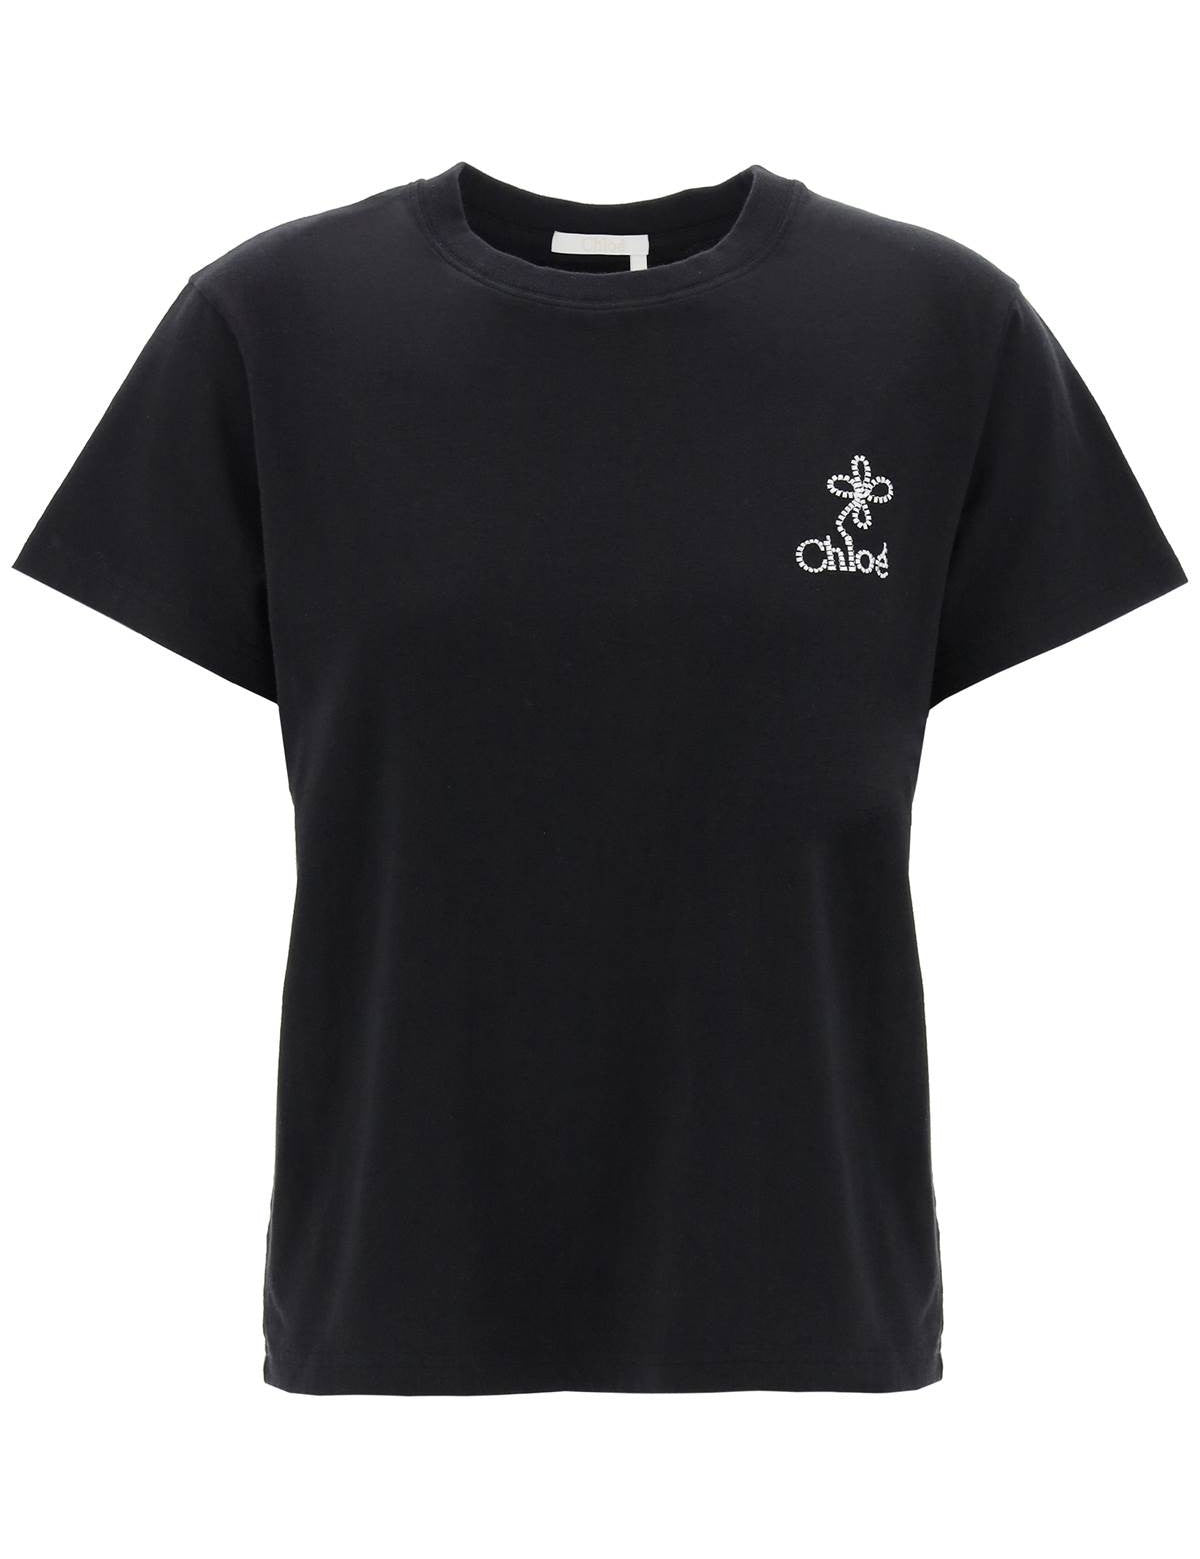 chloe-contrast-embroidered-logo-t-shirt-with-contrasting.jpg